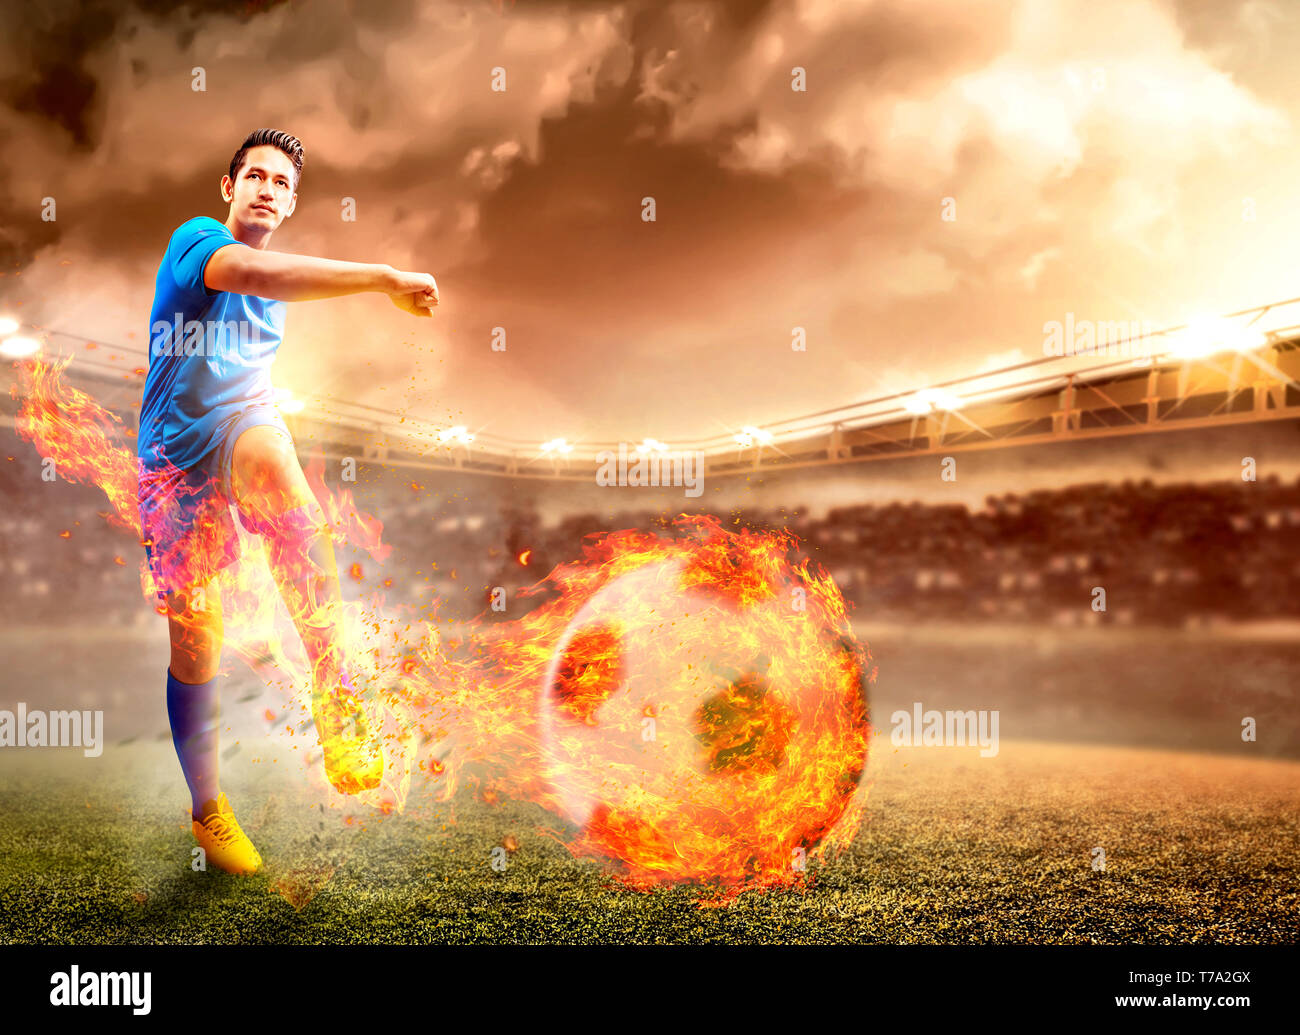 Asian Football Player Man In Blue Jersey With Kicking The Ball With Fire Effect On The Football Field At Stadium Stock Photo Alamy